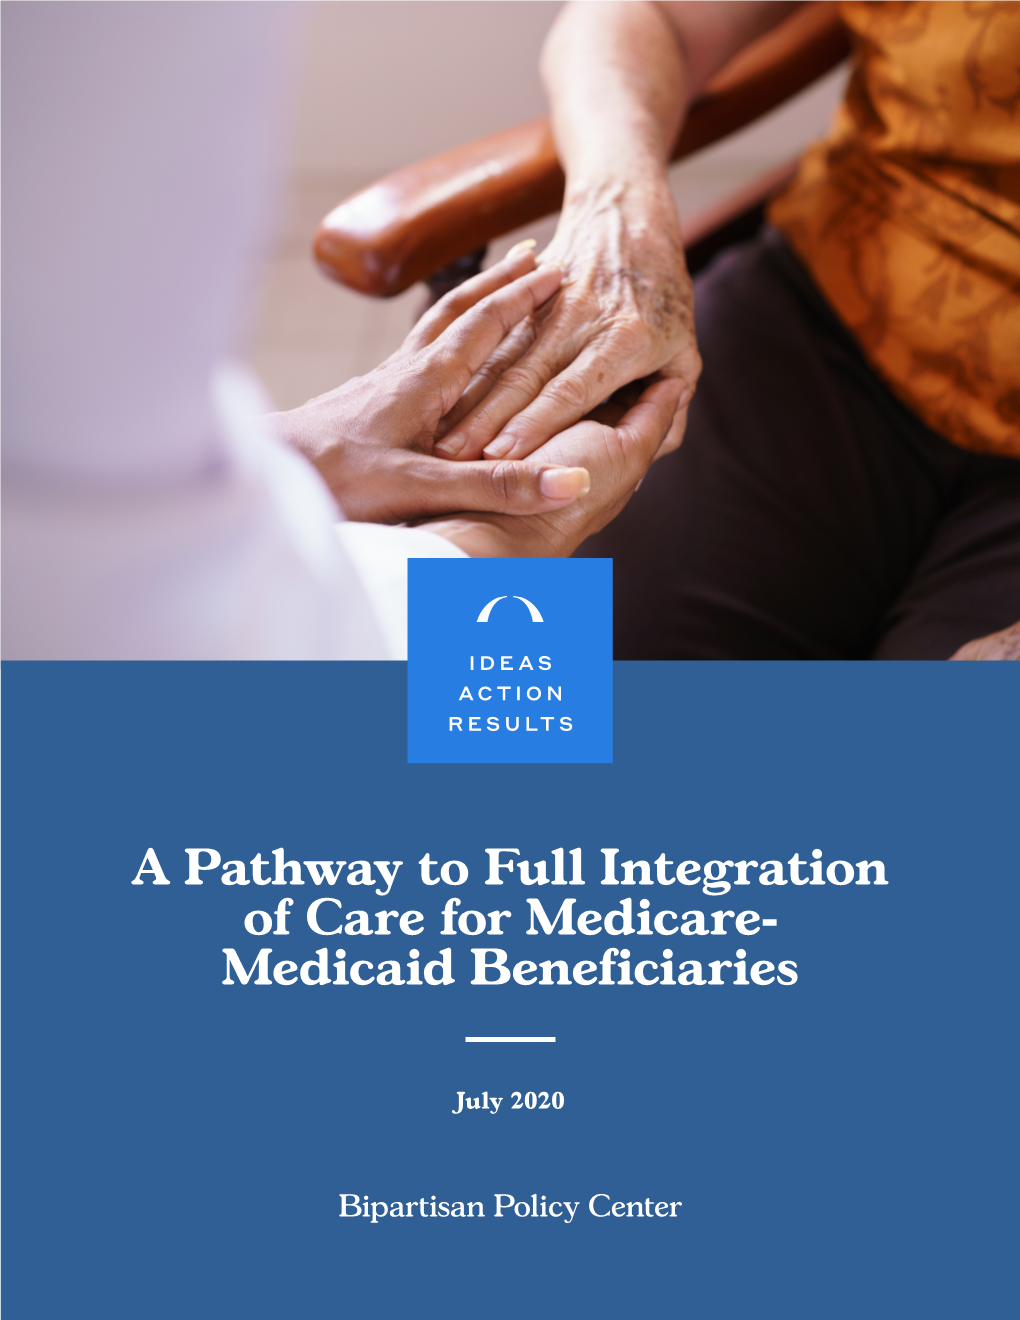 A Pathway to Full Integration of Care for Medicare- Medicaid Beneficiaries